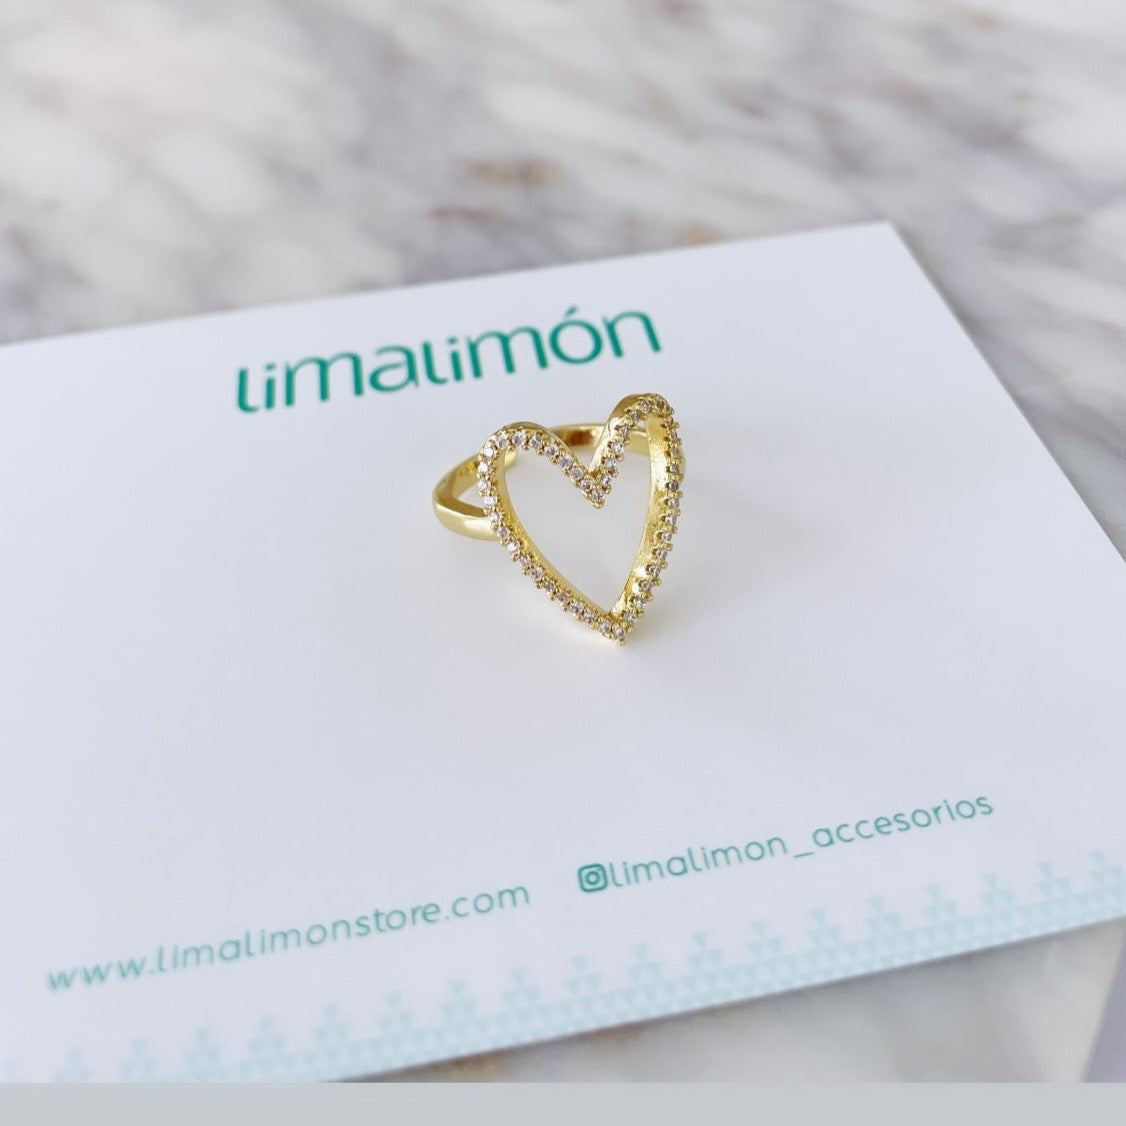 Heart Ring - LimaLimón Store